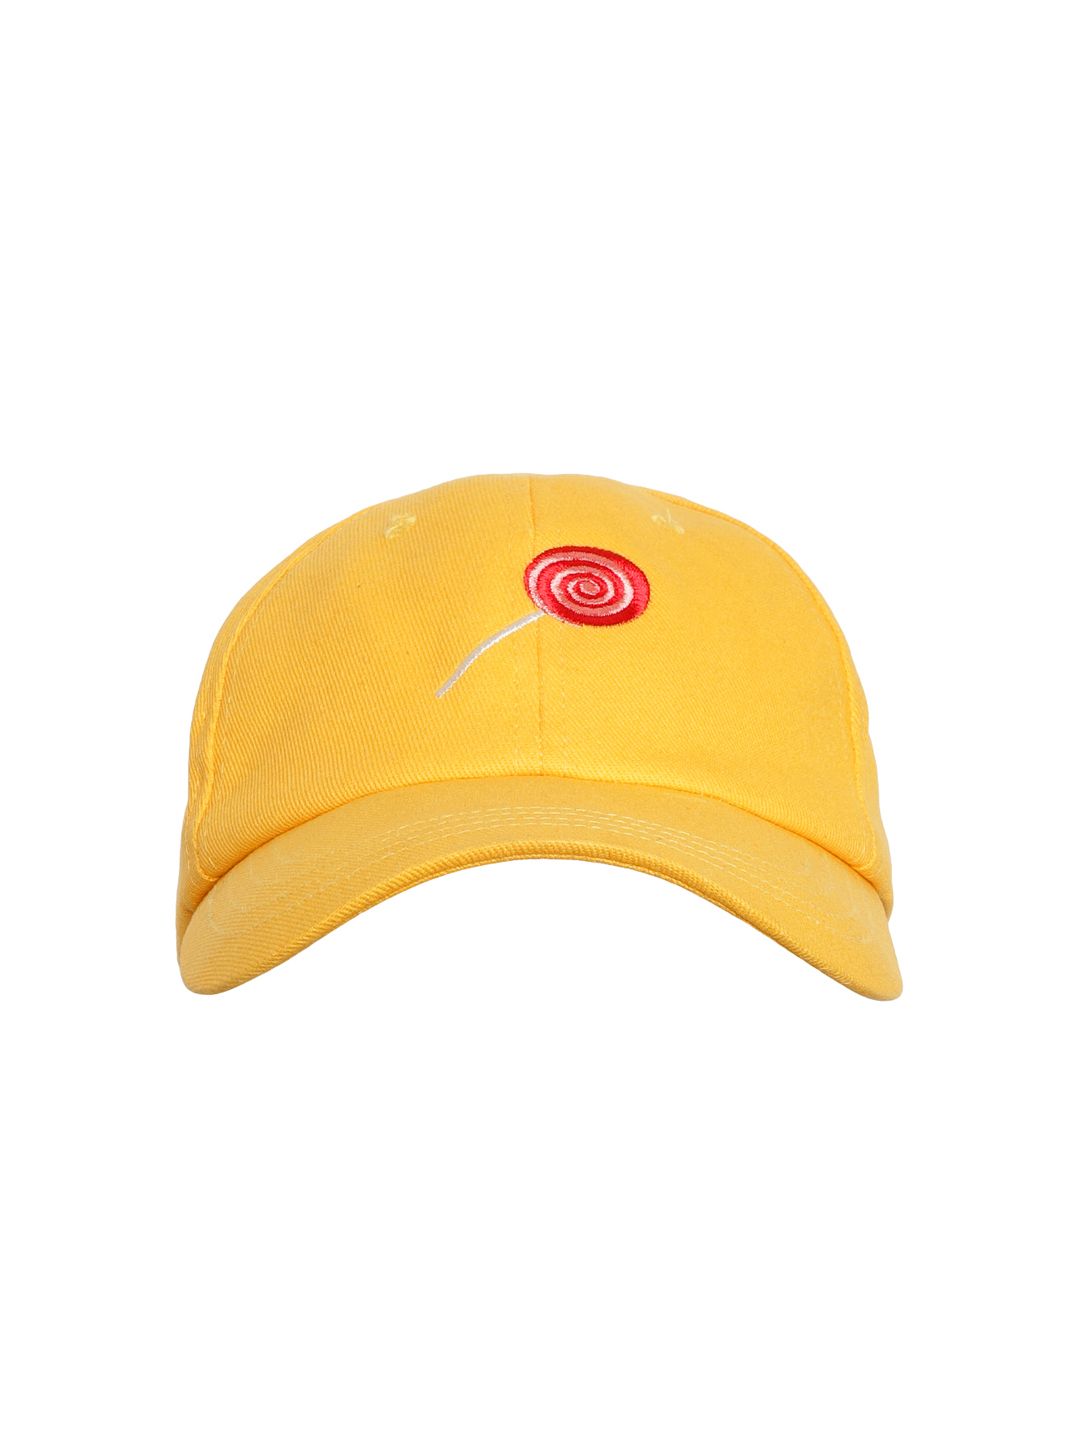 Blueberry Unisex Yellow & Red Embroidered Baseball Cap Price in India